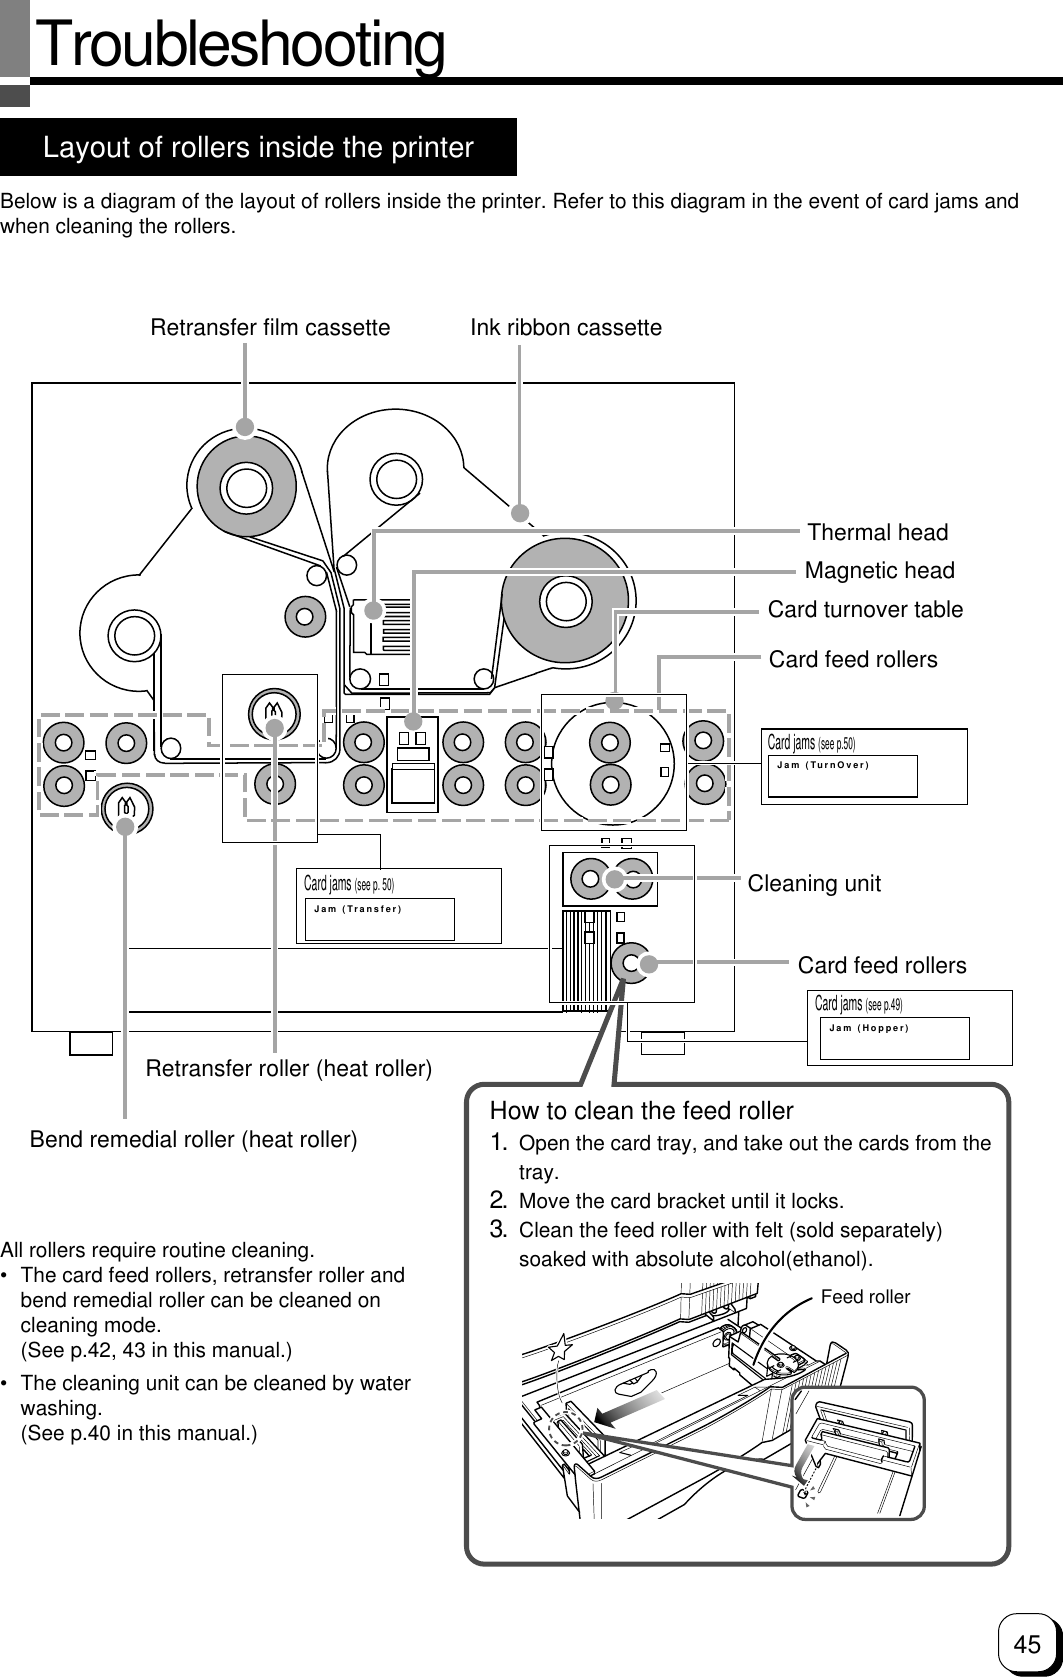 45Jam (TurnOver)Jam (Hopper)Jam (Transfer)TroubleshootingLayout of rollers inside the printerBelow is a diagram of the layout of rollers inside the printer. Refer to this diagram in the event of card jams andwhen cleaning the rollers.Retransfer film cassette Ink ribbon cassetteThermal headCard feed rollersCard jams (see p.50)Card jams (see p.49)Card jams (see p. 50)Cleaning unitCard feed rollersBend remedial roller (heat roller)Retransfer roller (heat roller)All rollers require routine cleaning.• The card feed rollers, retransfer roller andbend remedial roller can be cleaned oncleaning mode.(See p.42, 43 in this manual.)• The cleaning unit can be cleaned by waterwashing.(See p.40 in this manual.)Magnetic headCard turnover tableHow to clean the feed roller1. Open the card tray, and take out the cards from thetray.2. Move the card bracket until it locks.3. Clean the feed roller with felt (sold separately)soaked with absolute alcohol(ethanol).Feed roller